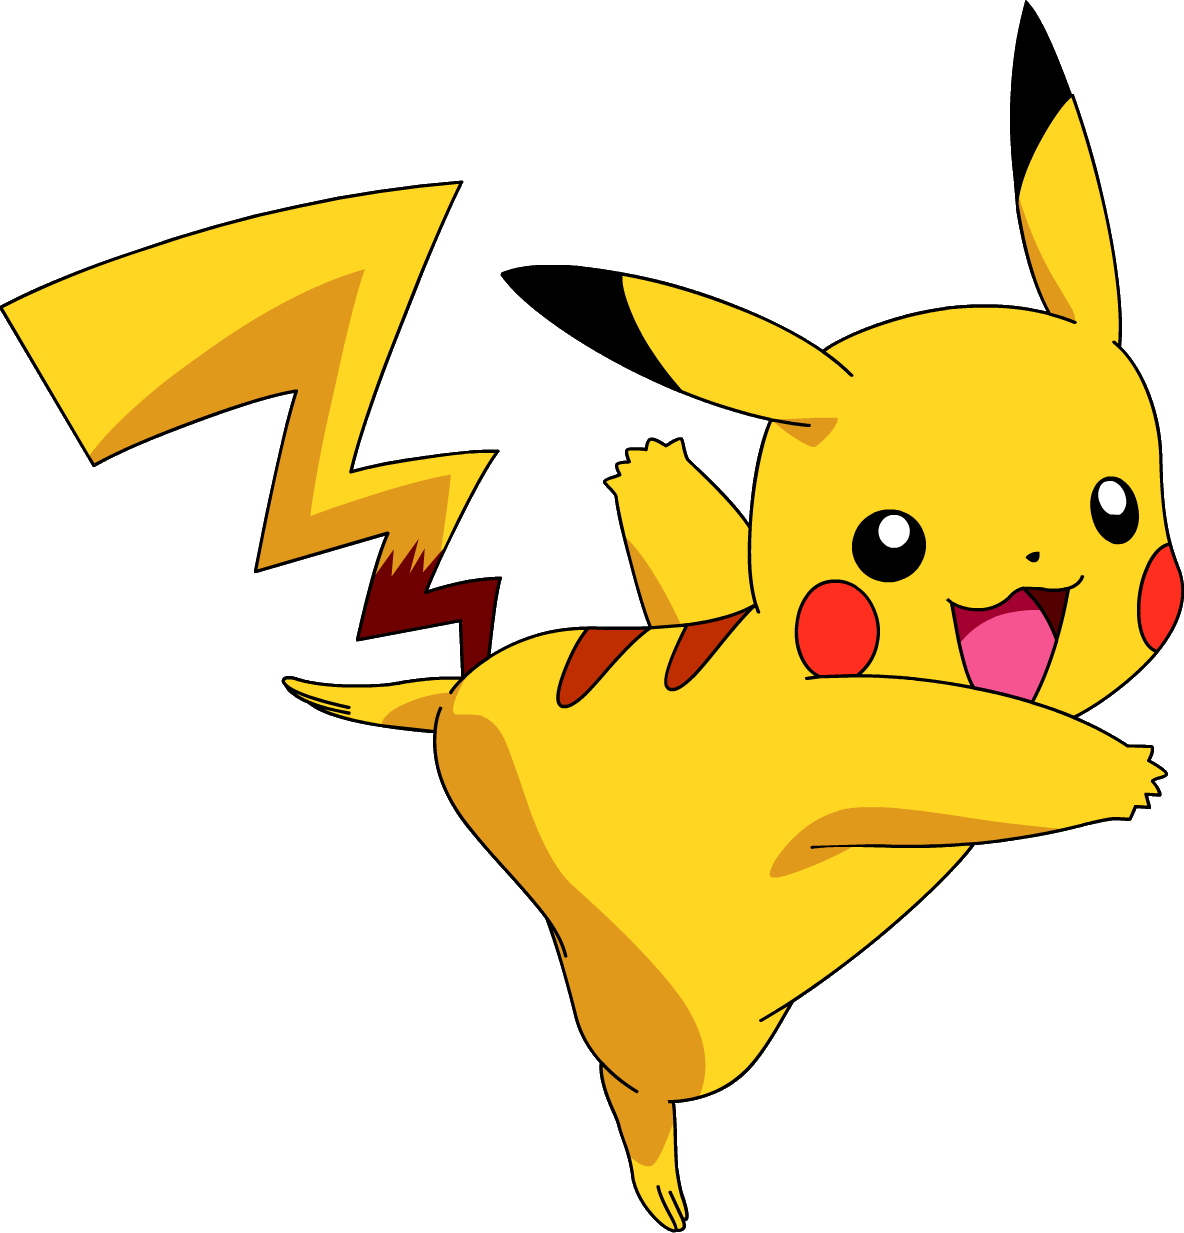 Pikachu Clipart Roblox Pikachu Roblox Transparent Free For Download On Webstockreview 2020 - pikachu clipart roblox pokemon raichu png download